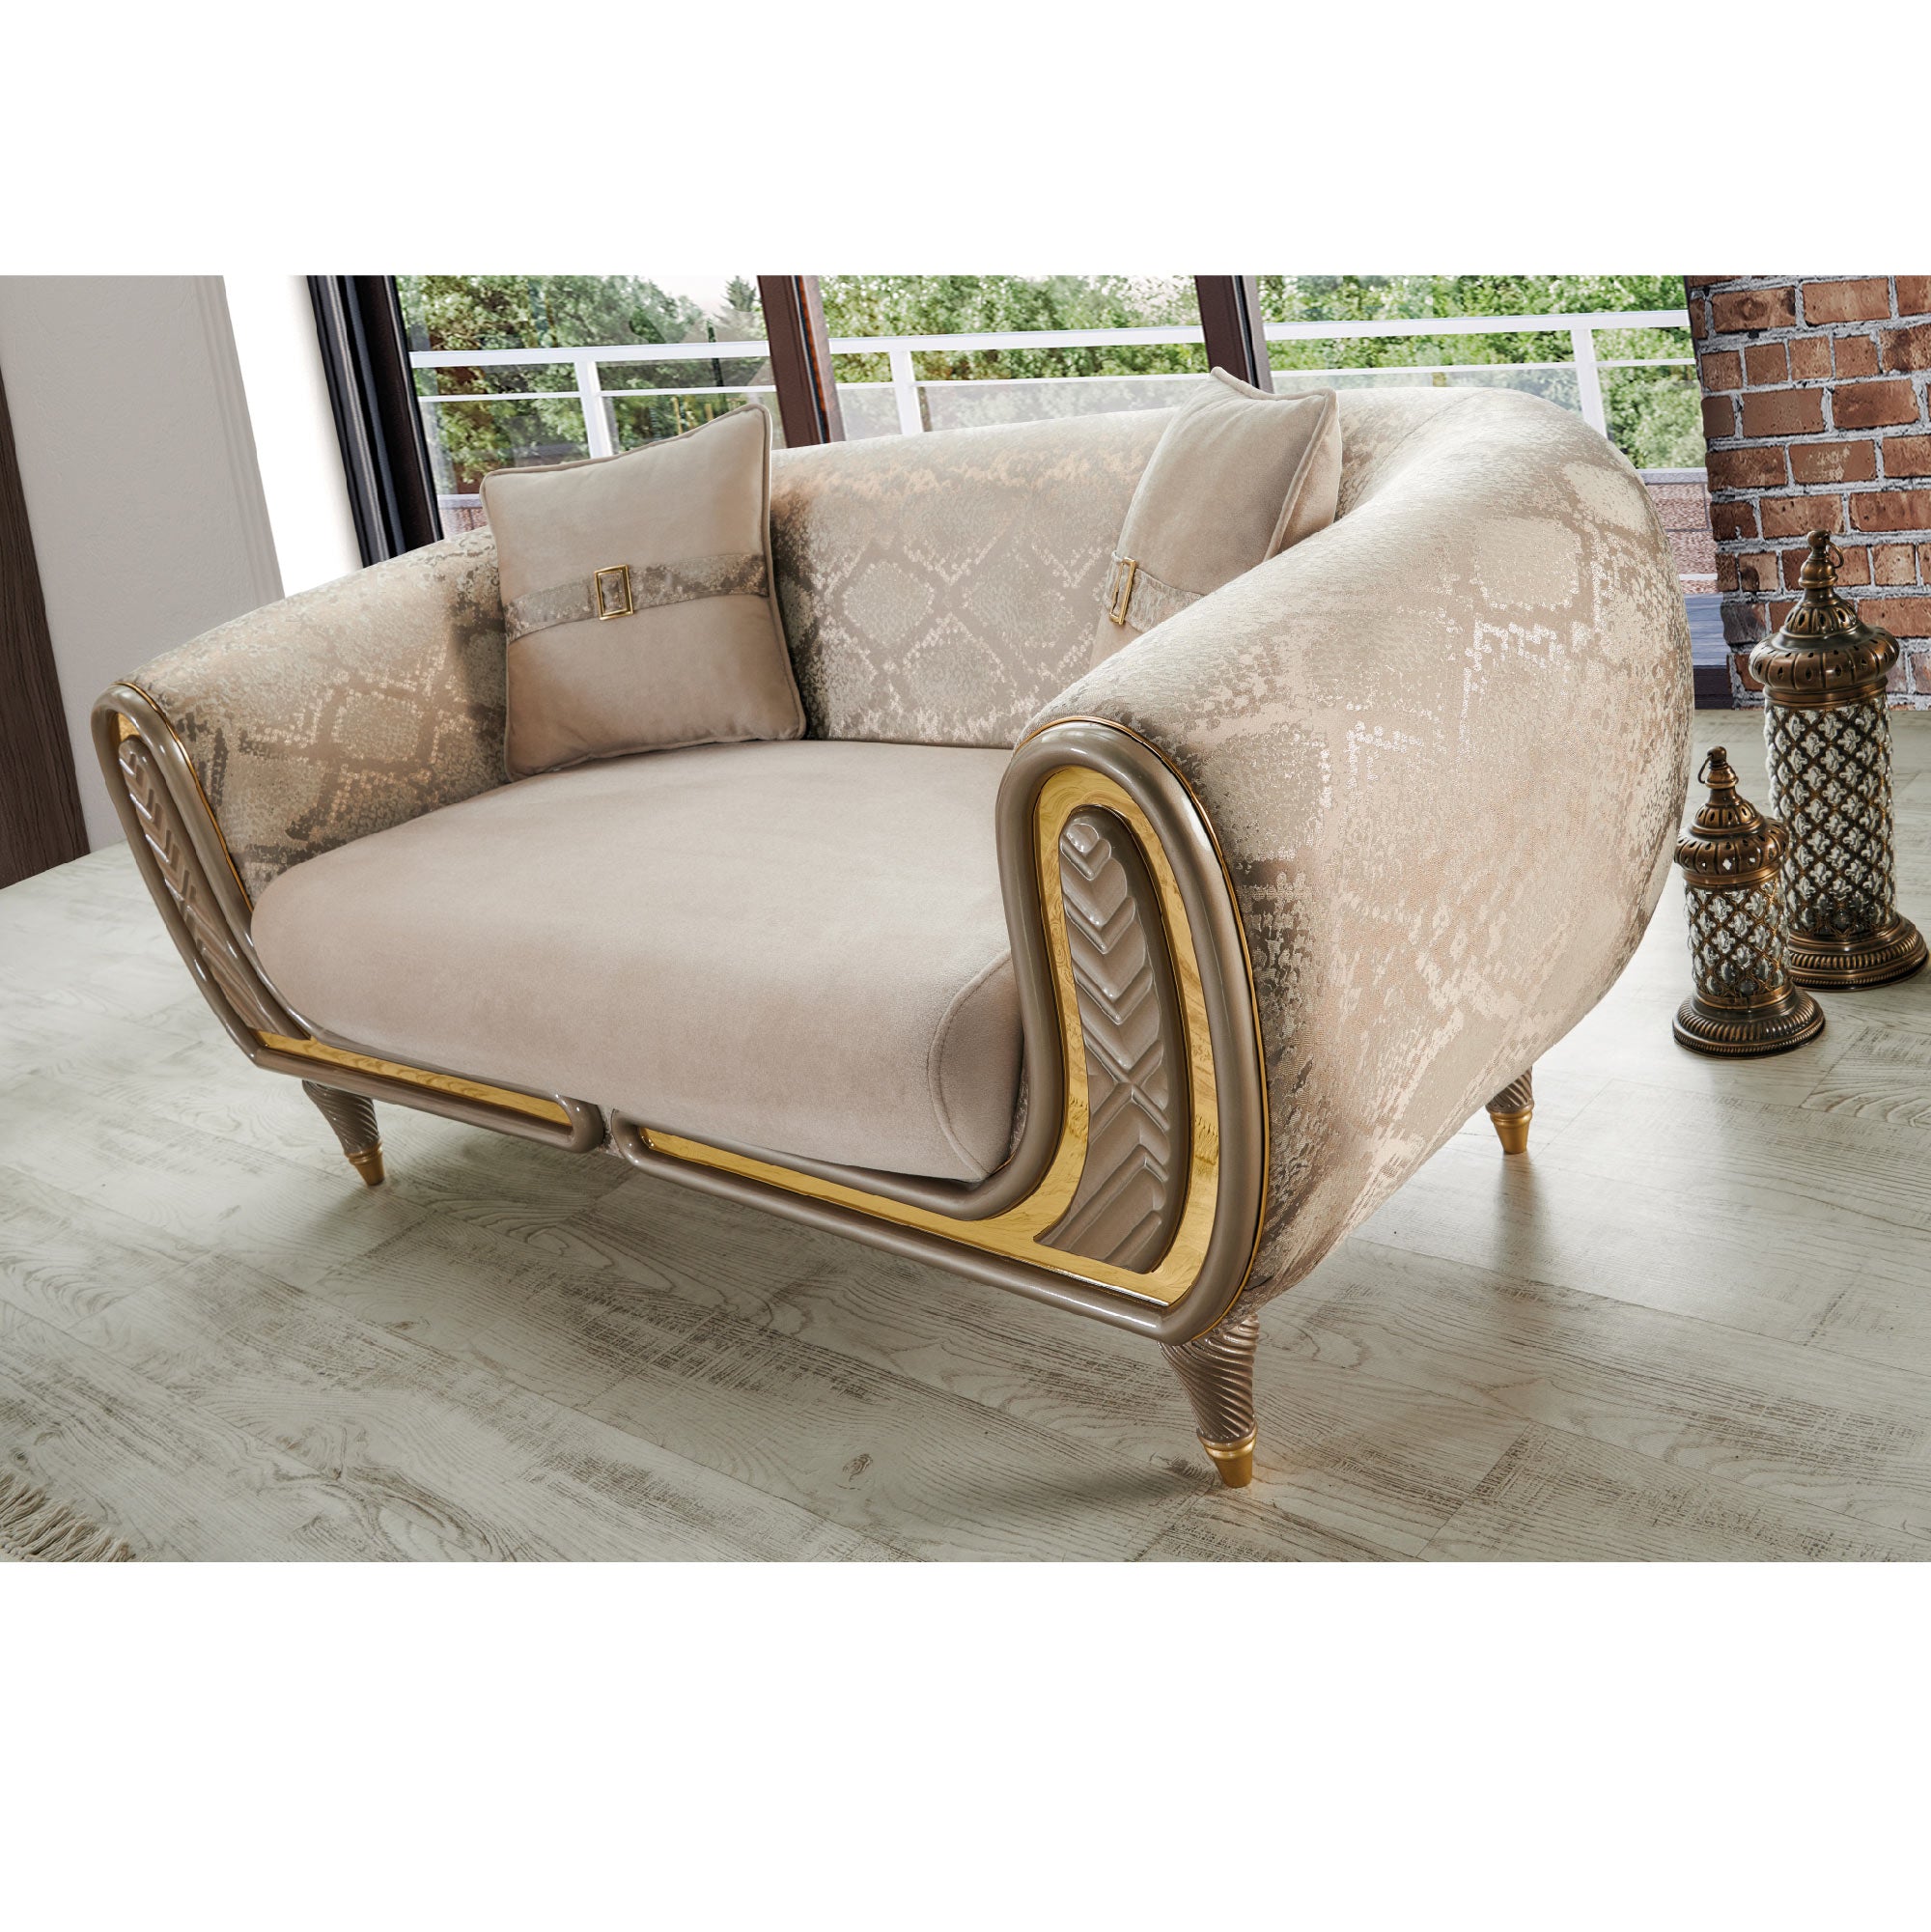 Lima Loveseat - Home Store Furniture